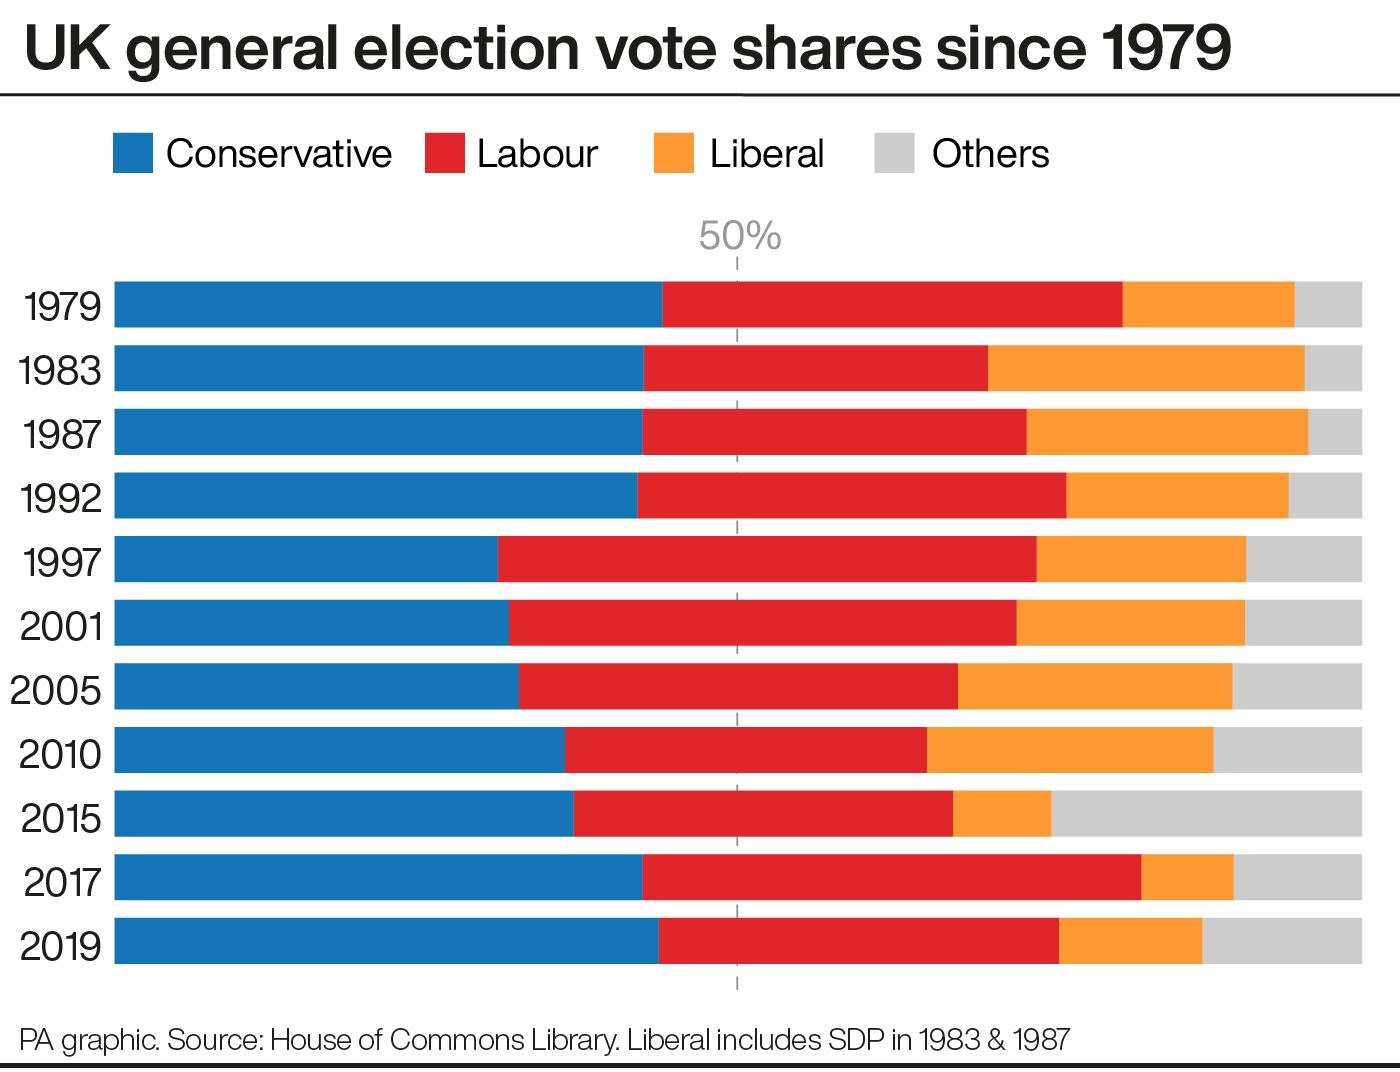 Vote shares at general elections since 1979 (PA Graphics)